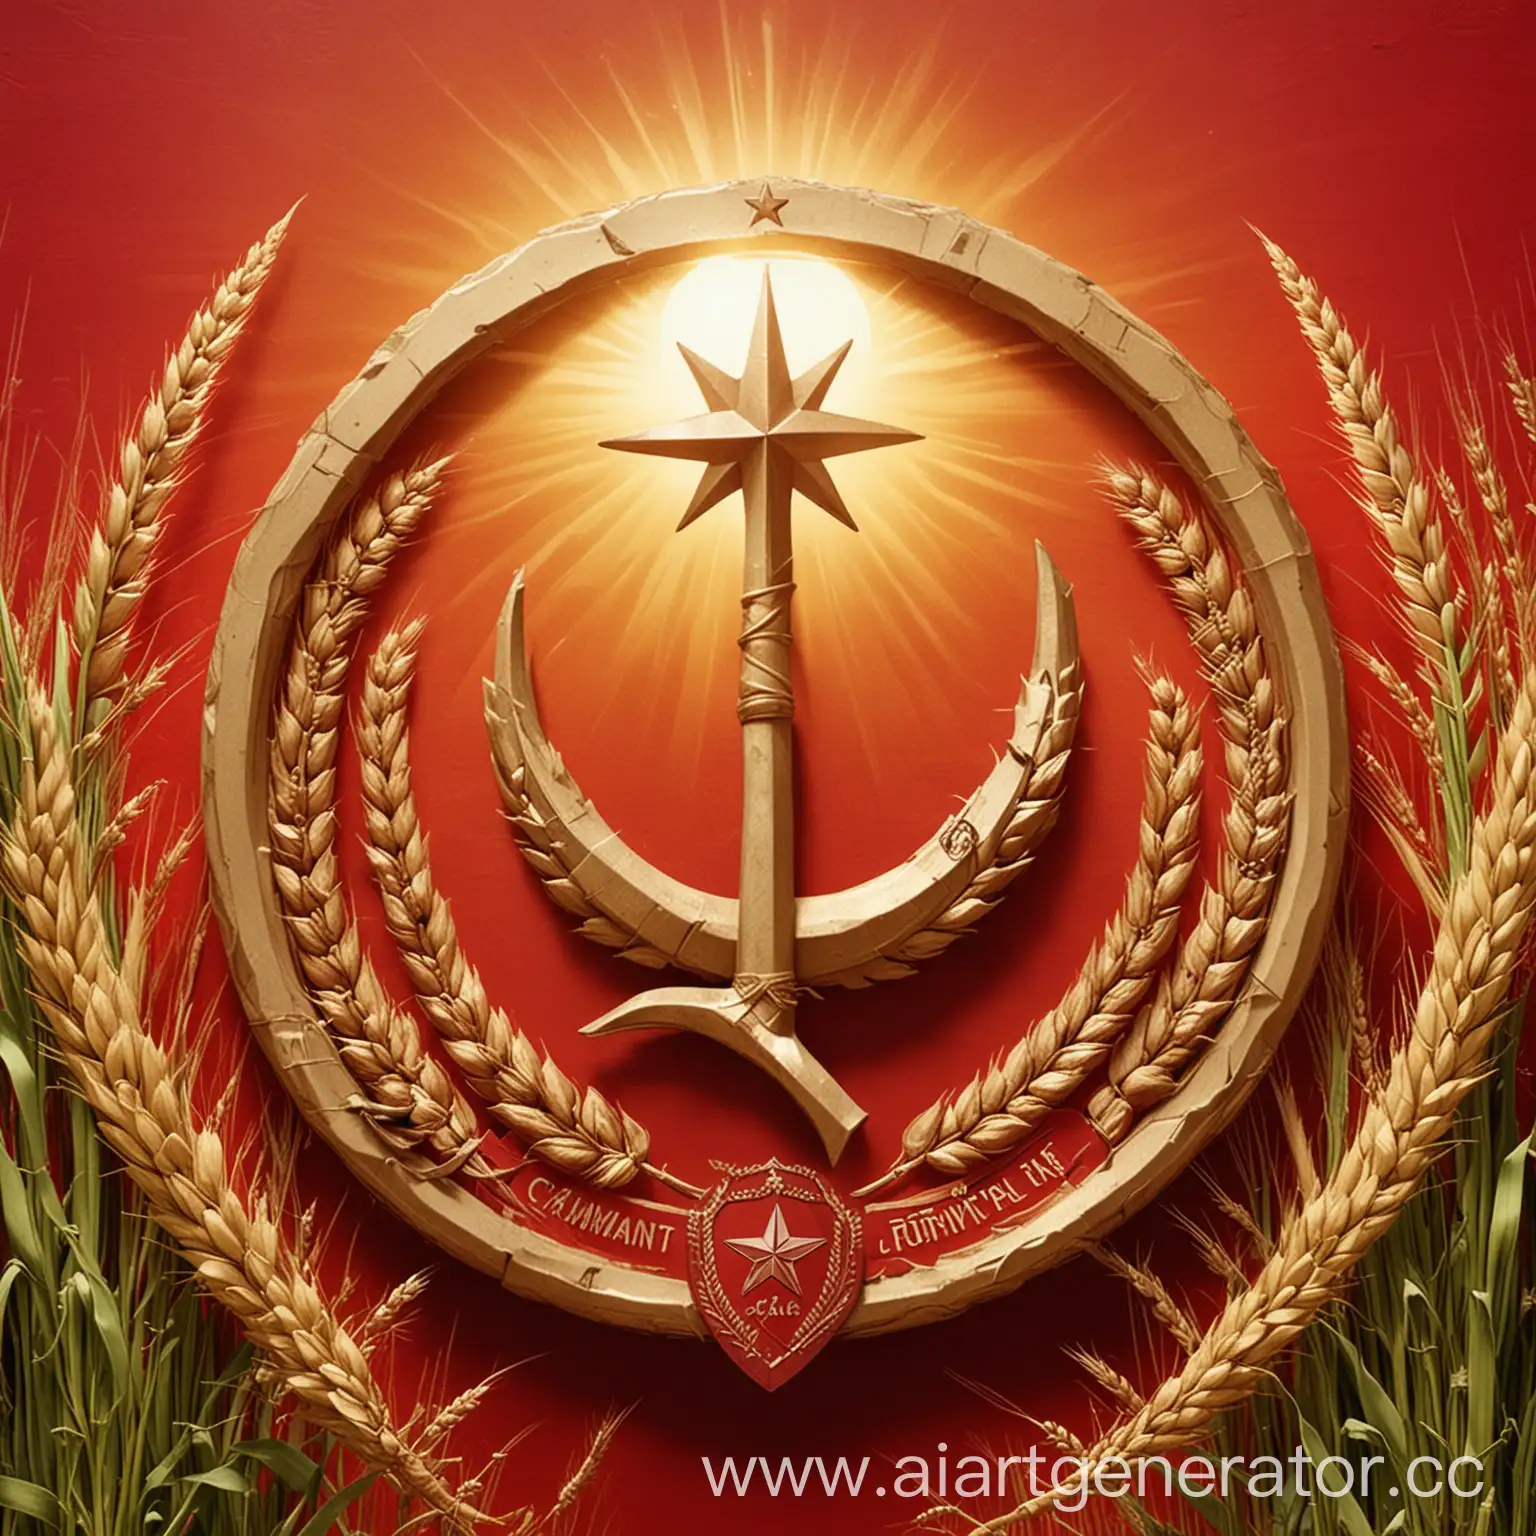 Digital-Council-Emblem-Sickle-and-Hammer-on-Red-Background-with-Sun-Rays